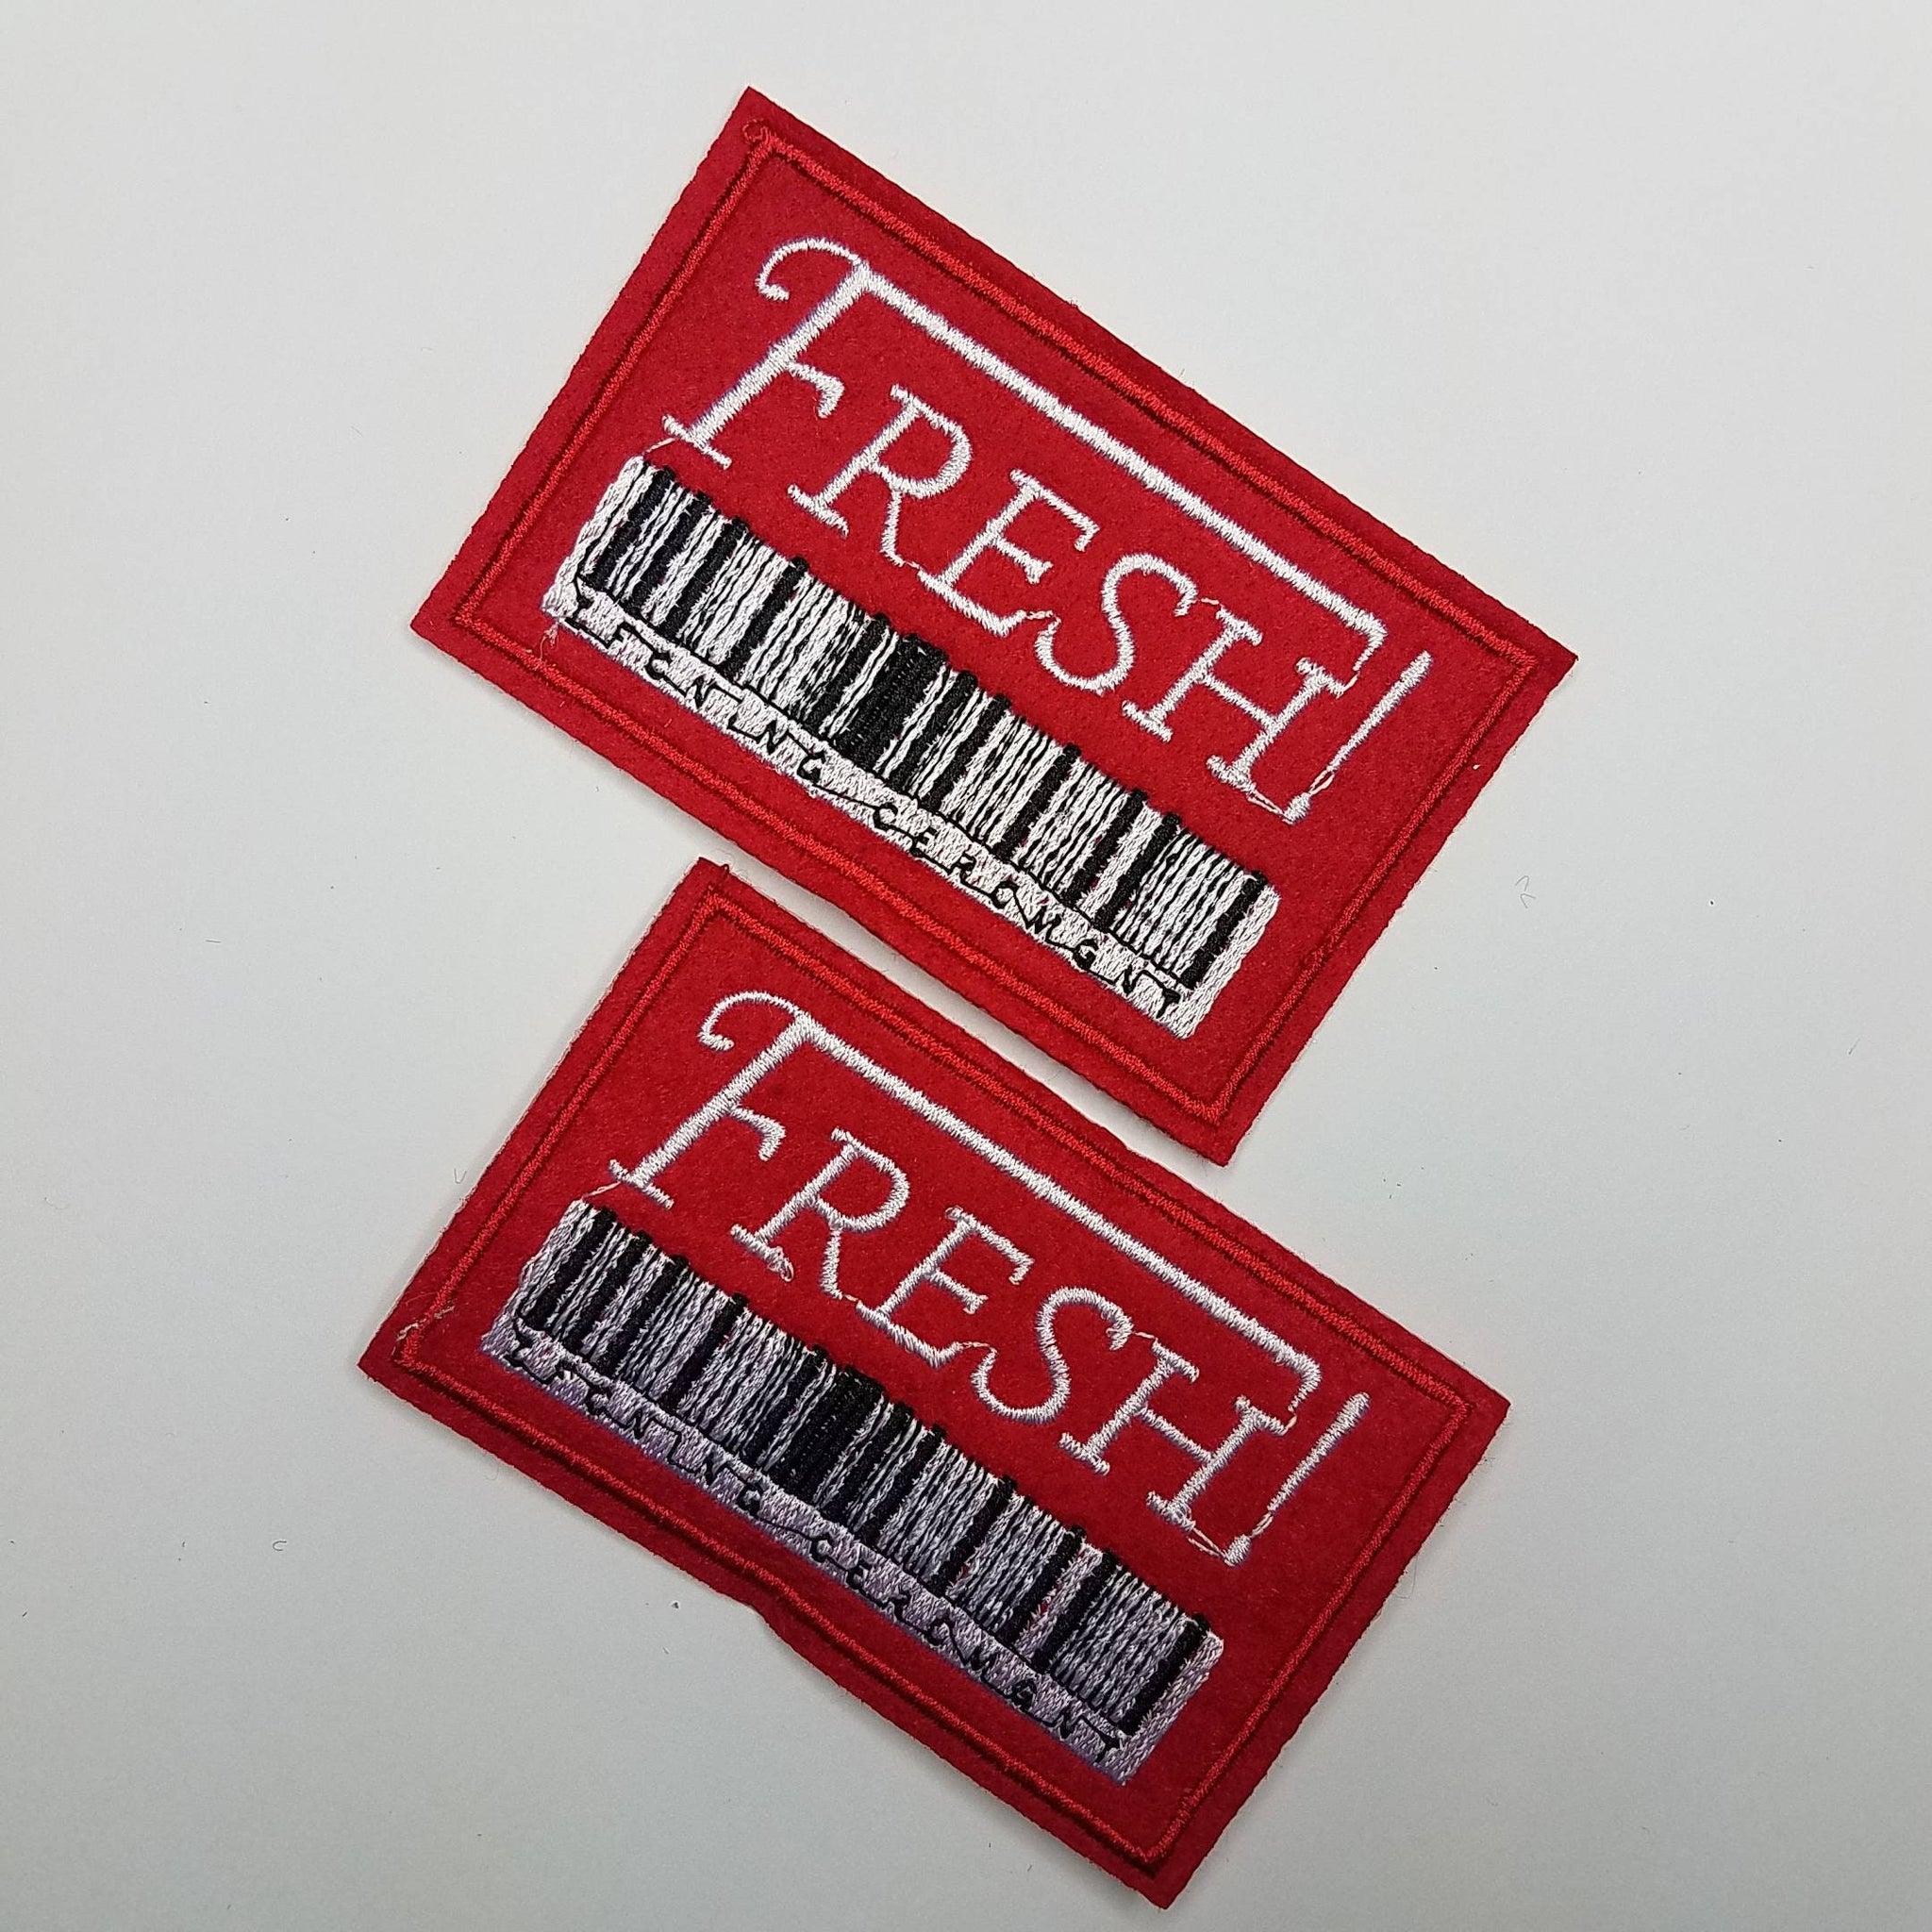 Red "Fresh" Patch with Barcode, Iron-On Embroidered Applique; Patch for Clothing, Size 4"x3"